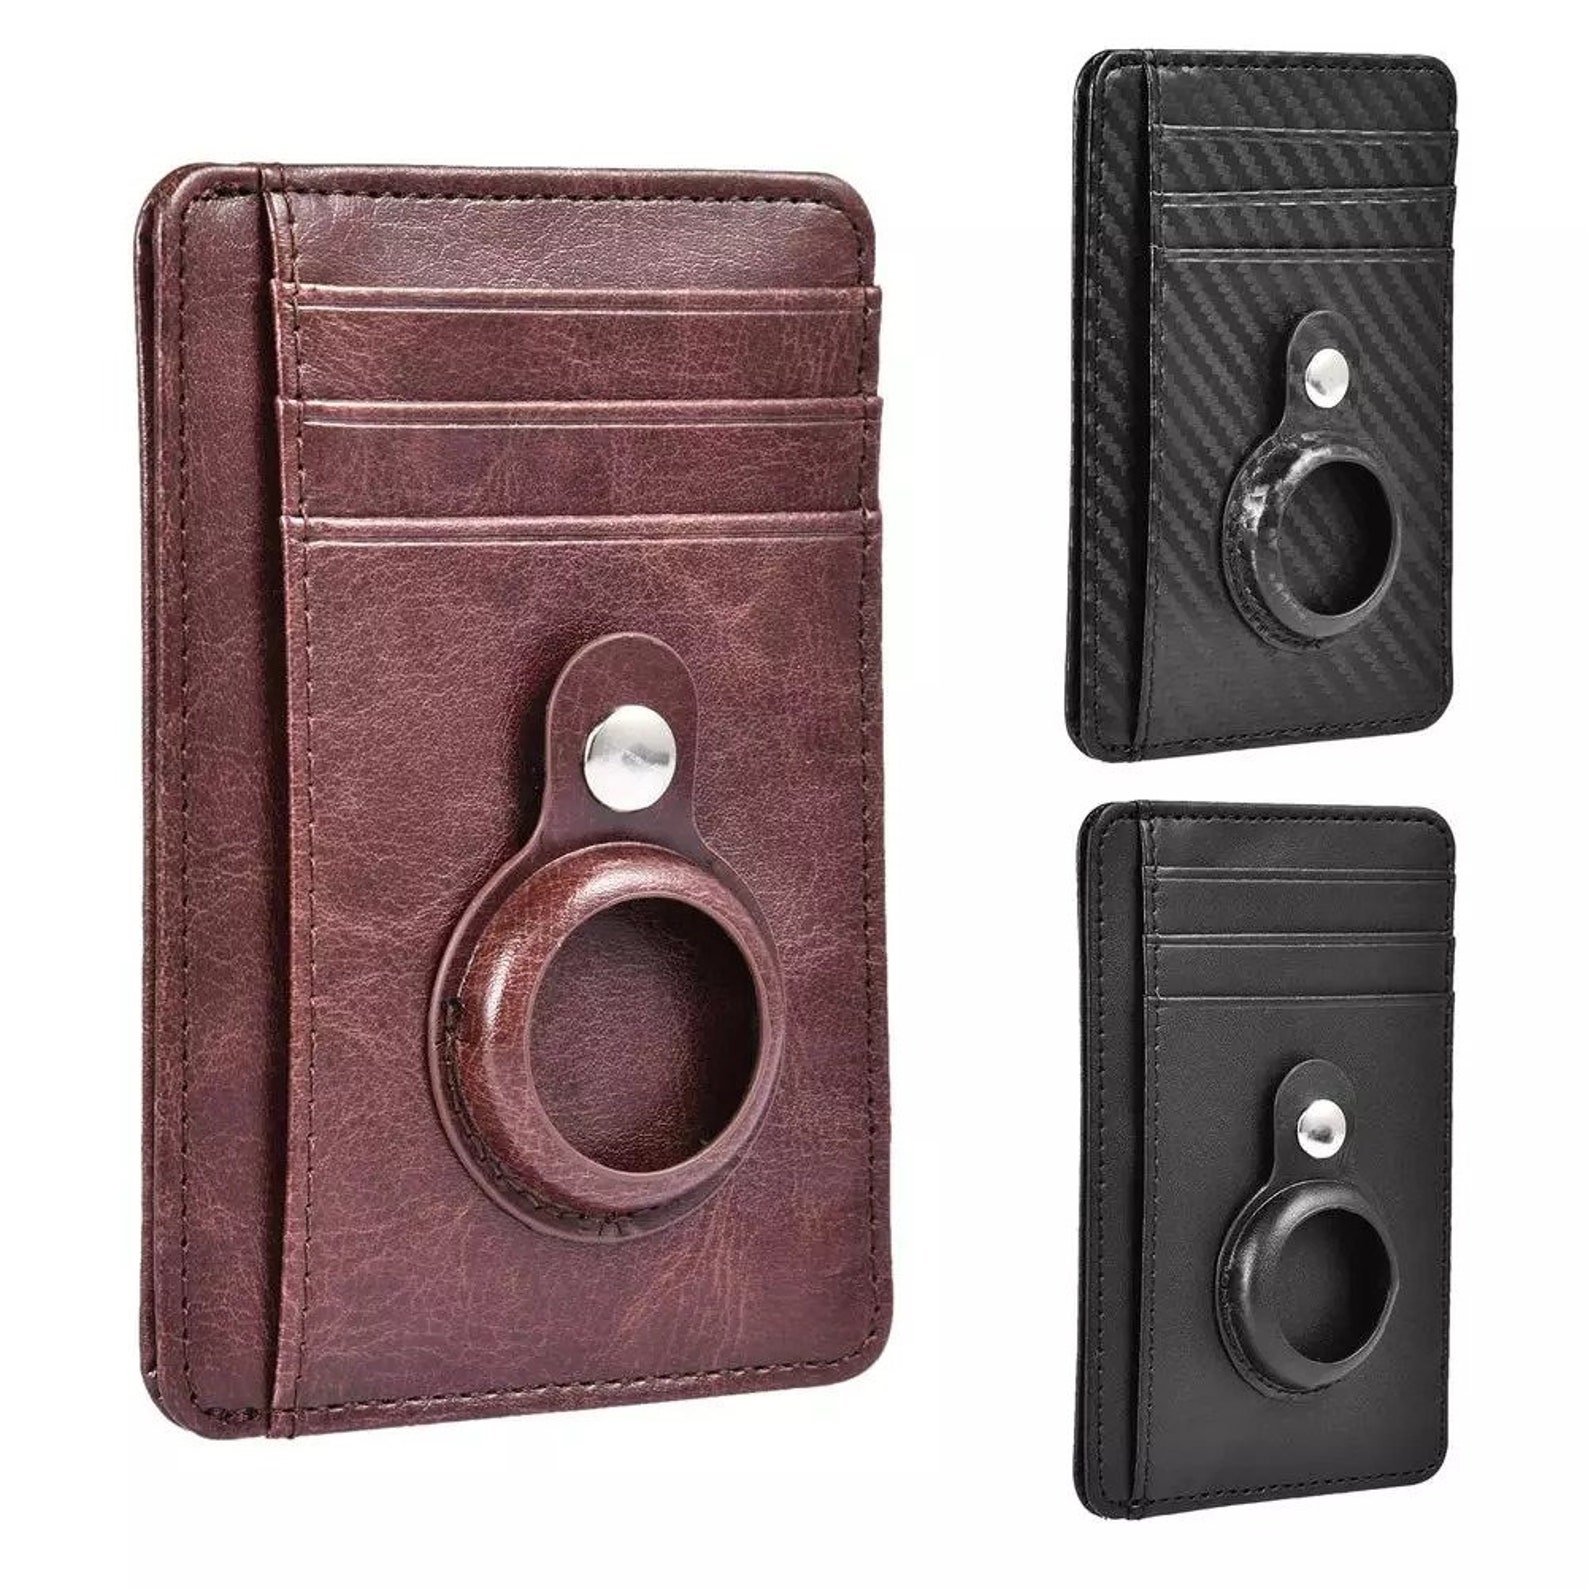 Airtag Wallet Genuine Leather and Carbon Fiber Airtag Case - Etsy